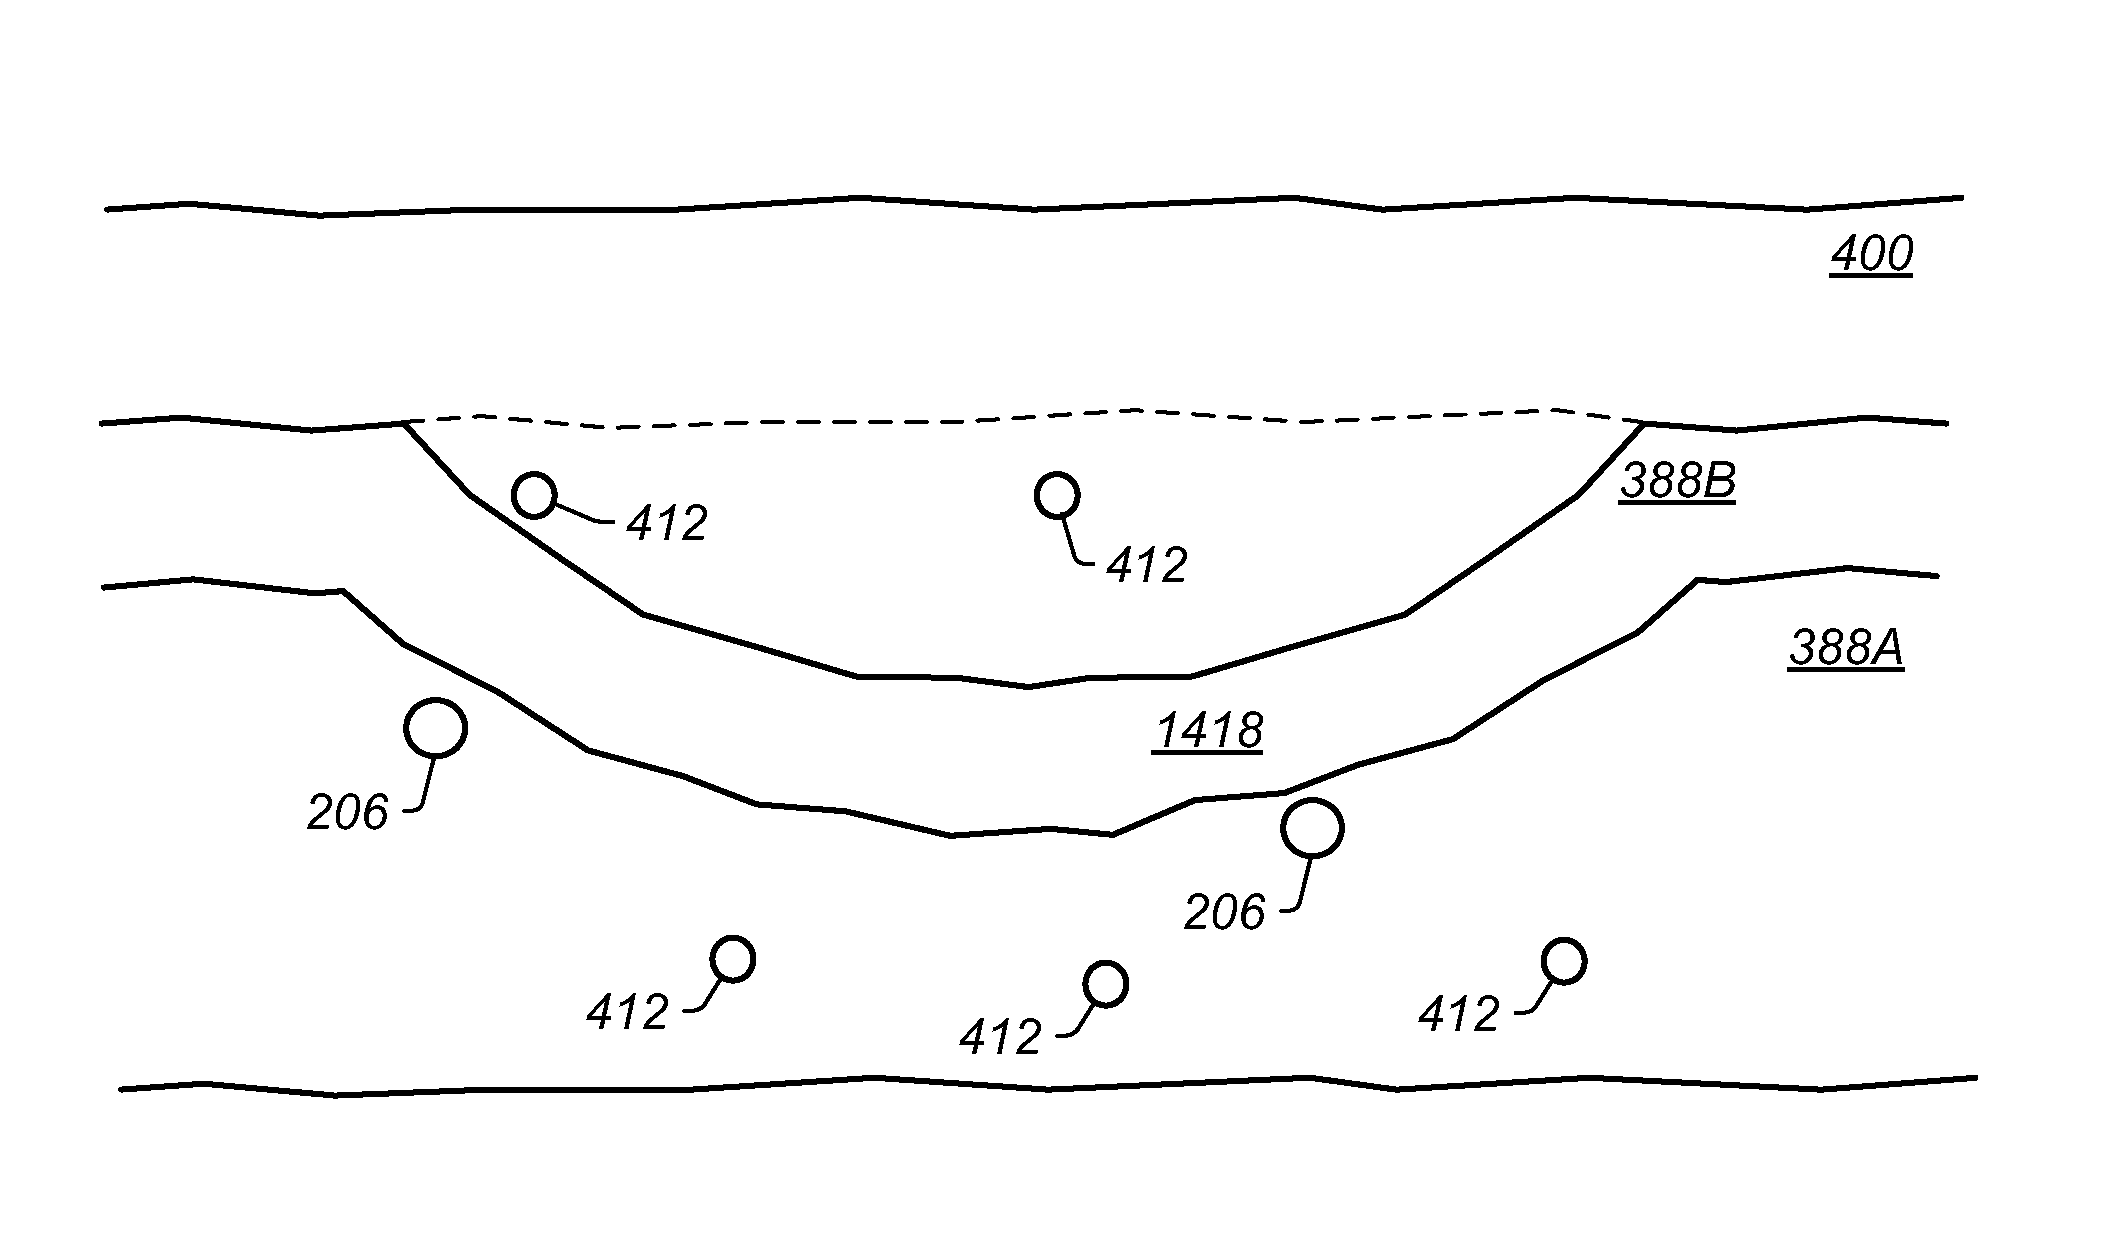 Heated liners for treating subsurface hydrocarbon containing formations